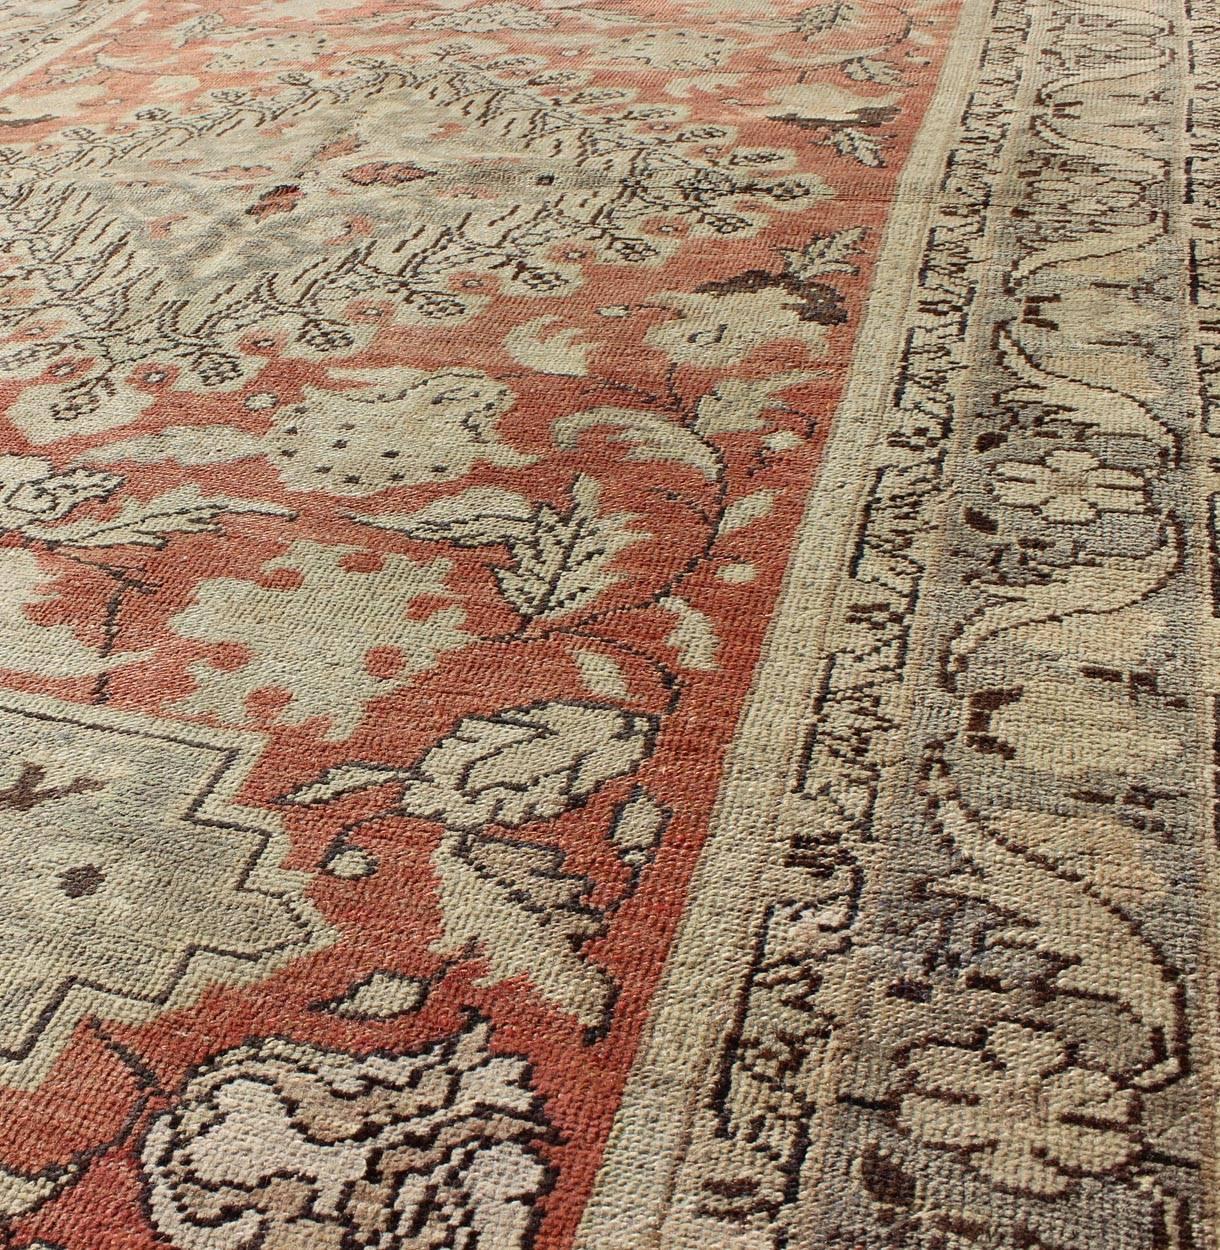 20th Century Antique Turkish Oushak Rug with Geometric Medallion and Floral Designs For Sale